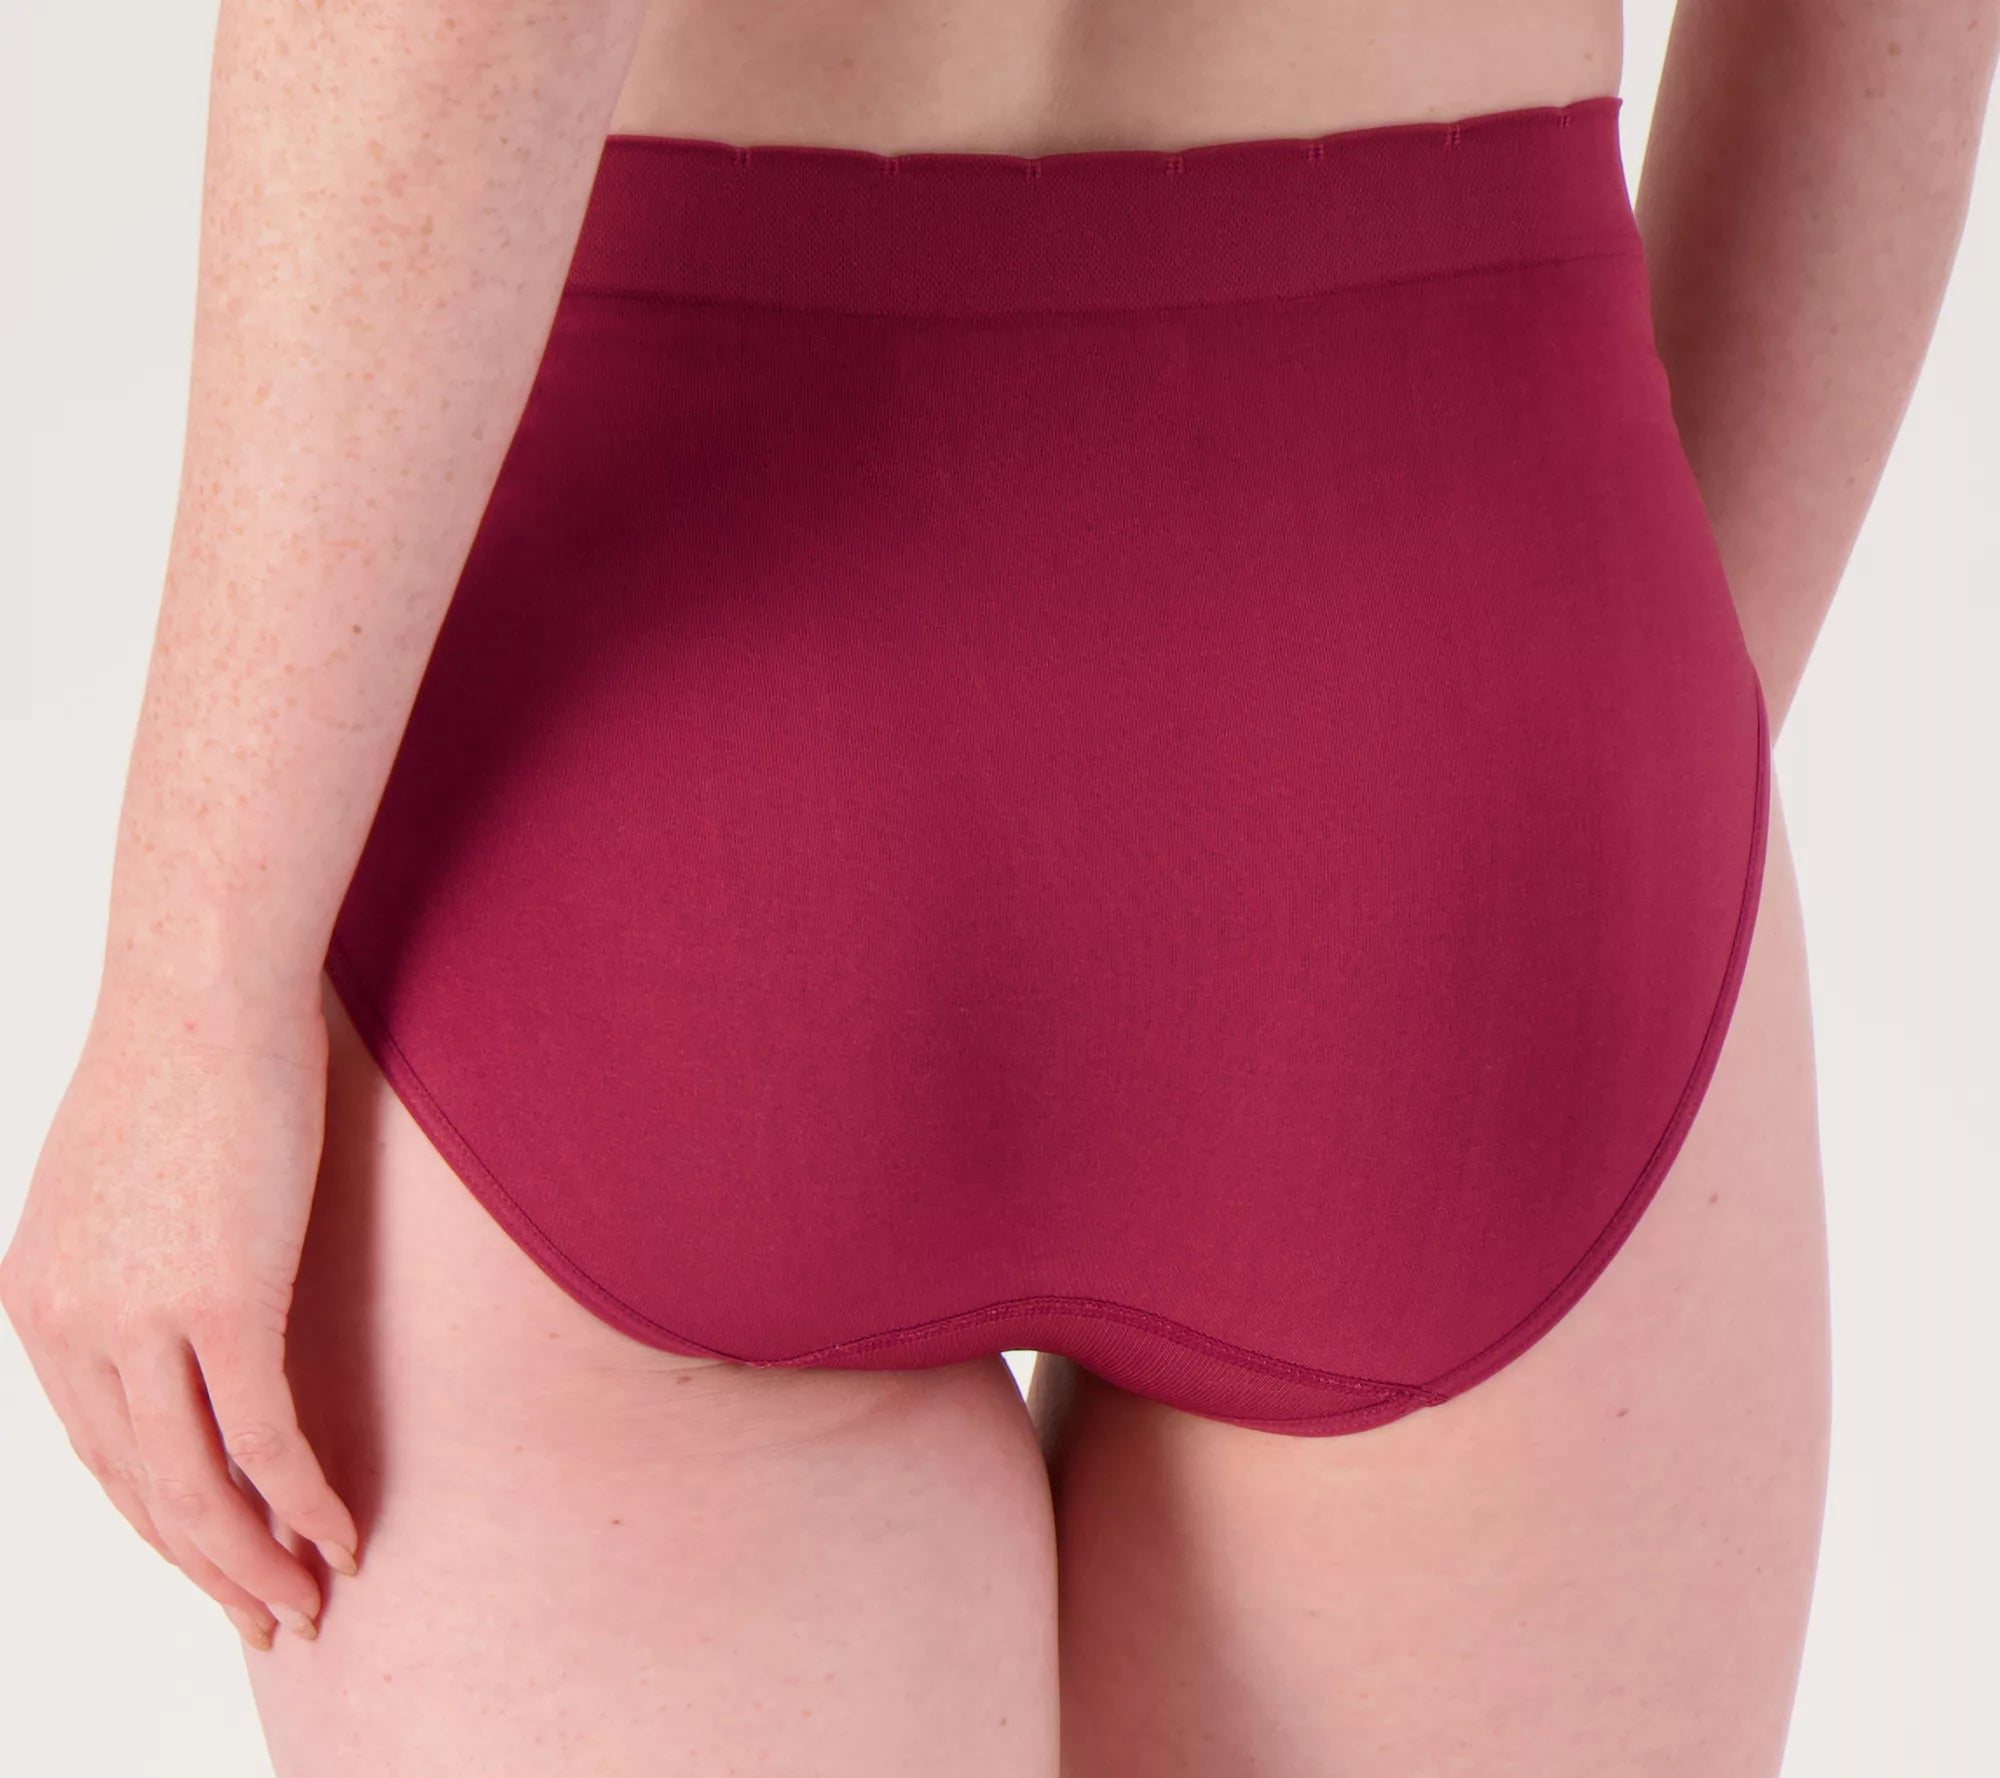 Breezies 3-Pack Seamless Comfort Scalloped Brief Panty Basic